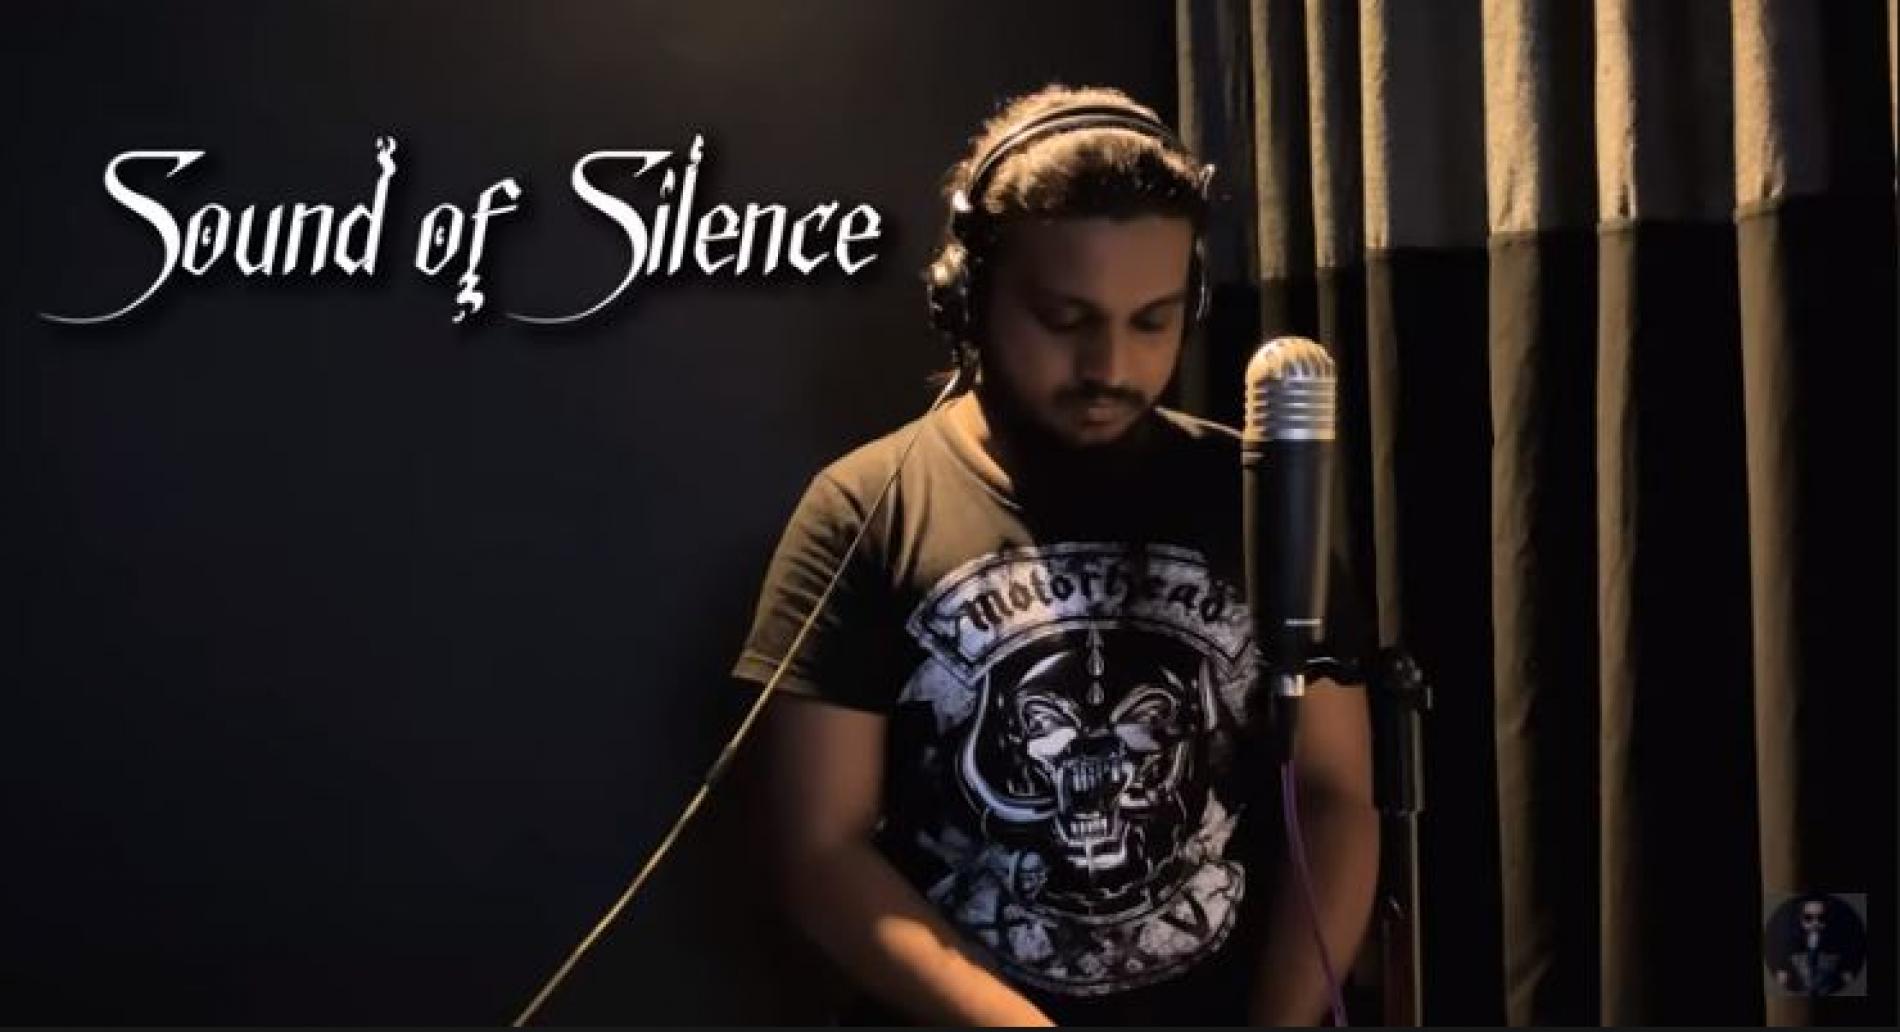 New Music : Sound of Silence – Vocal Cover by Lakshika Seneviratne